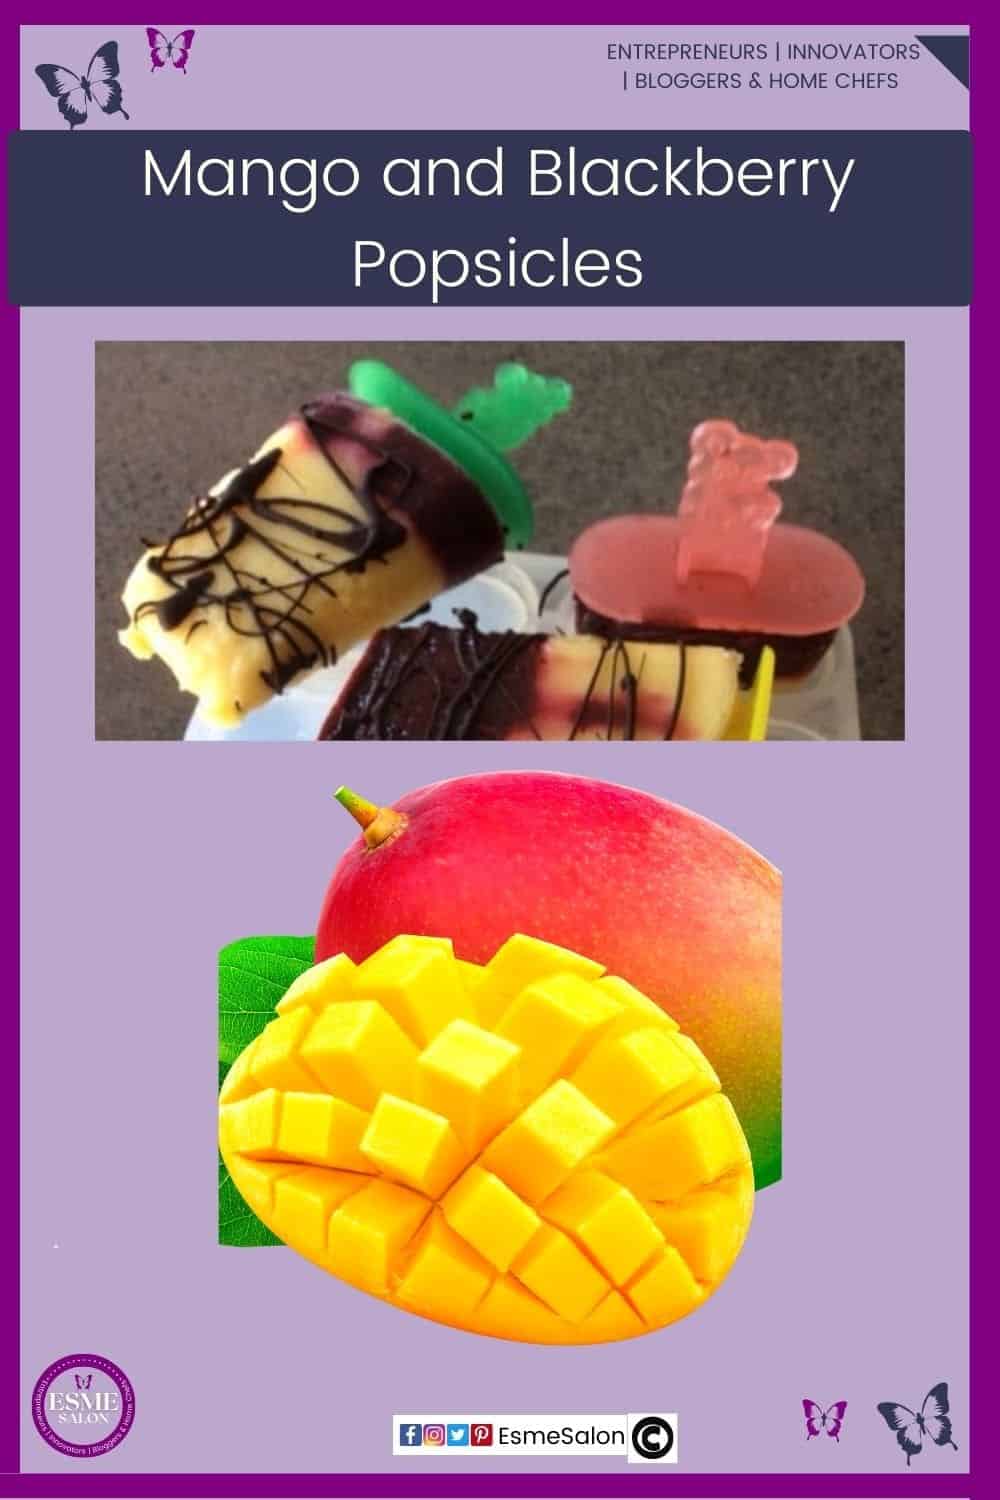 an image of 3 Mango and Blackberry Popsicles